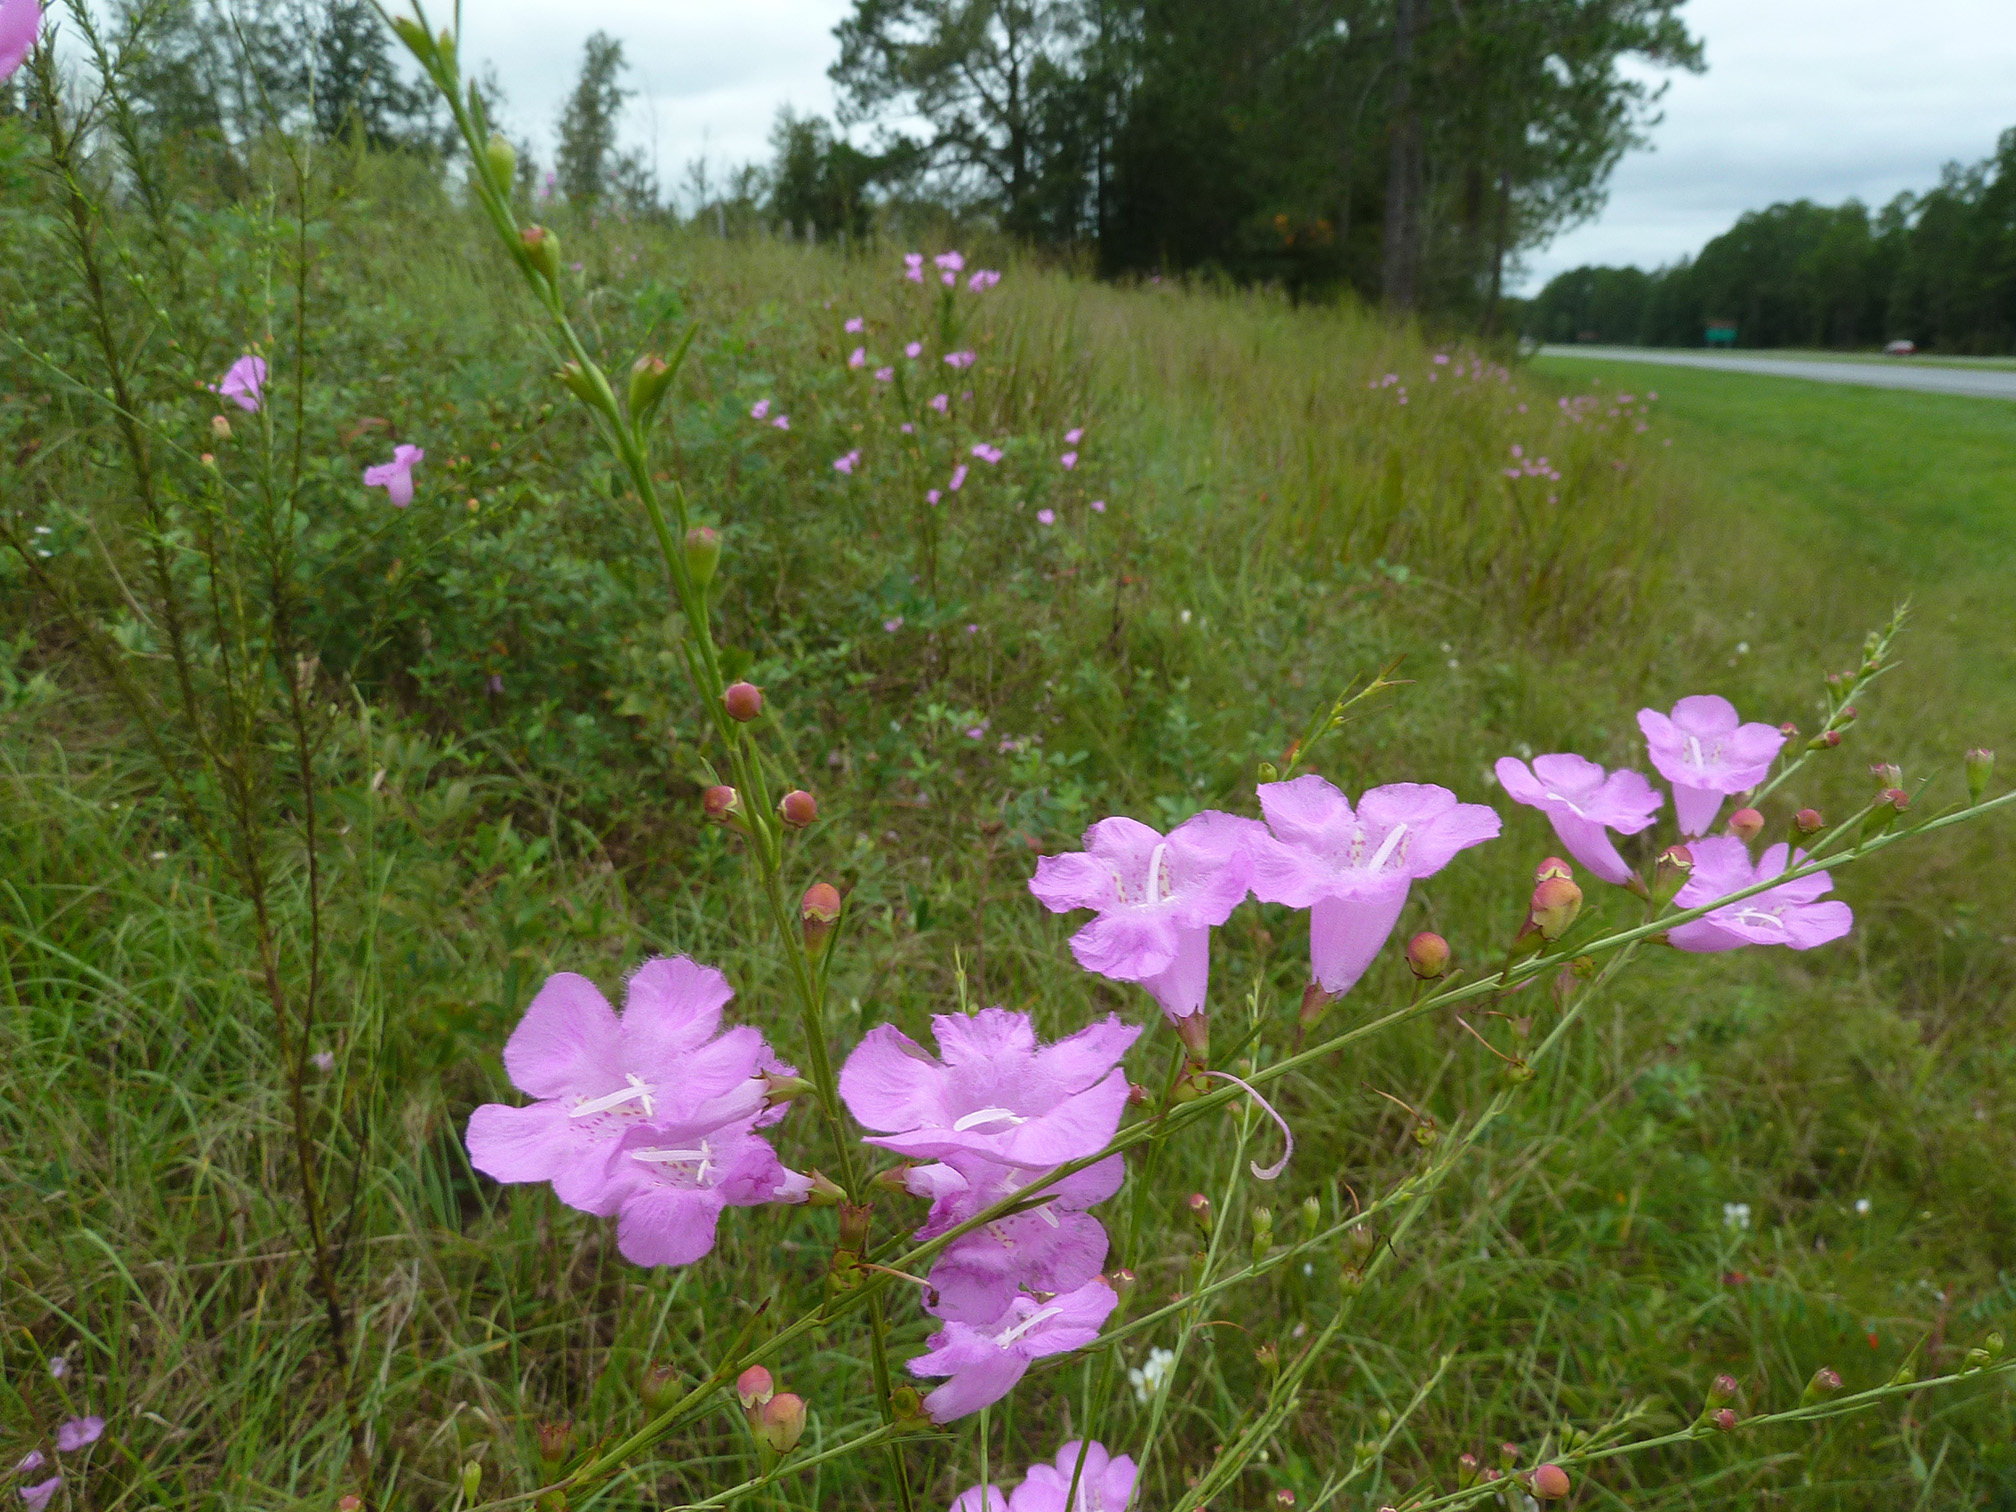 Groups of pink, bell-shaped flowers grow among long green grass. In the distance, cars pass by on a road